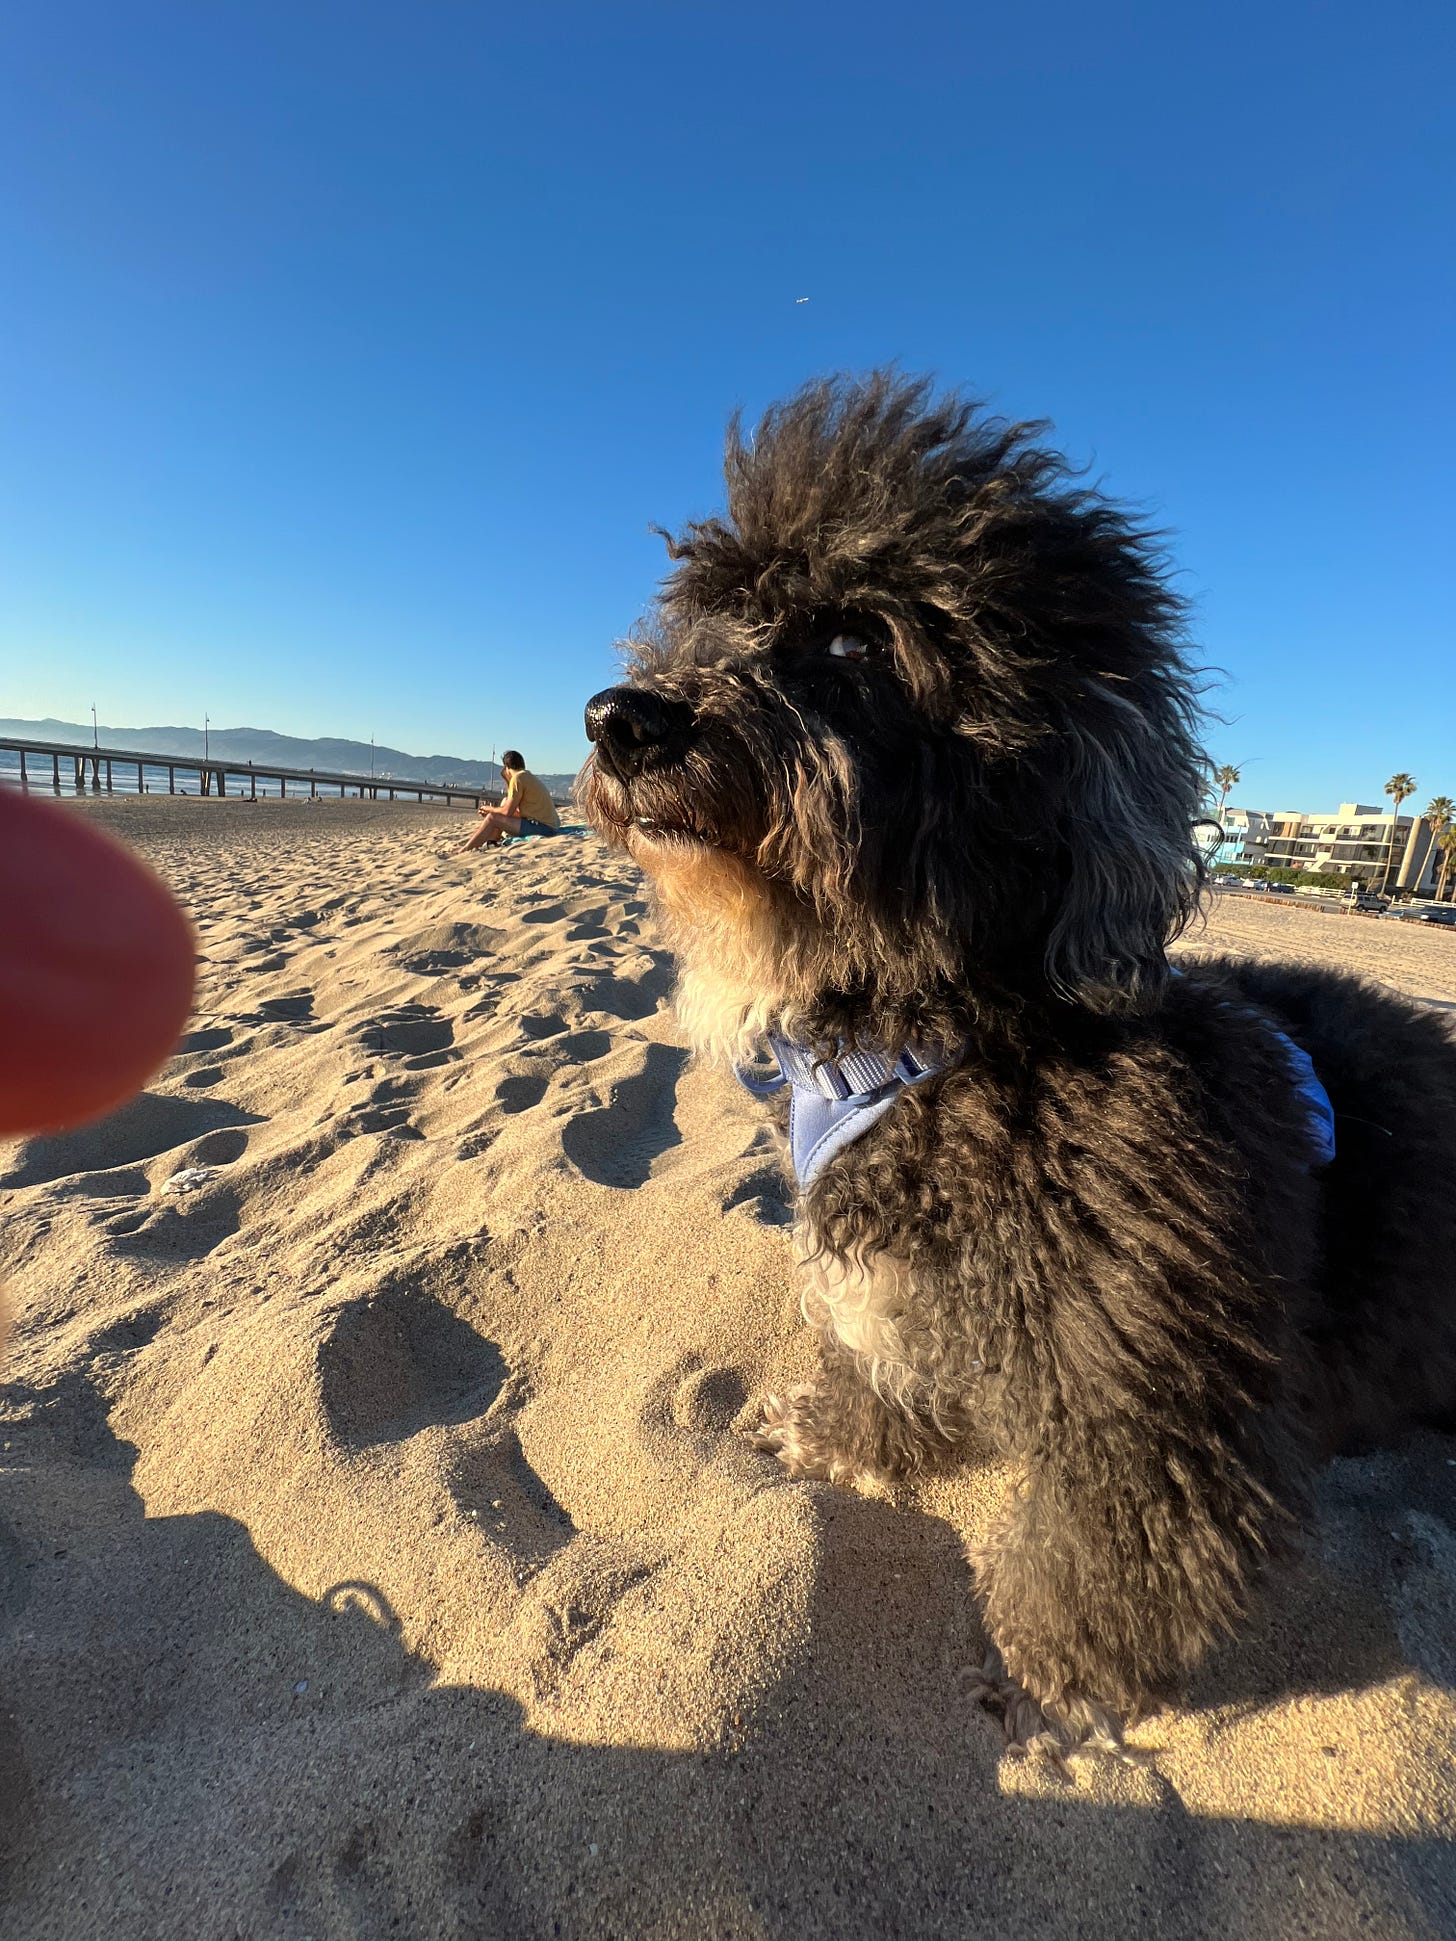 Small shaggy-haired black dog gives side-eye to the camera, seated on Venice Beach.